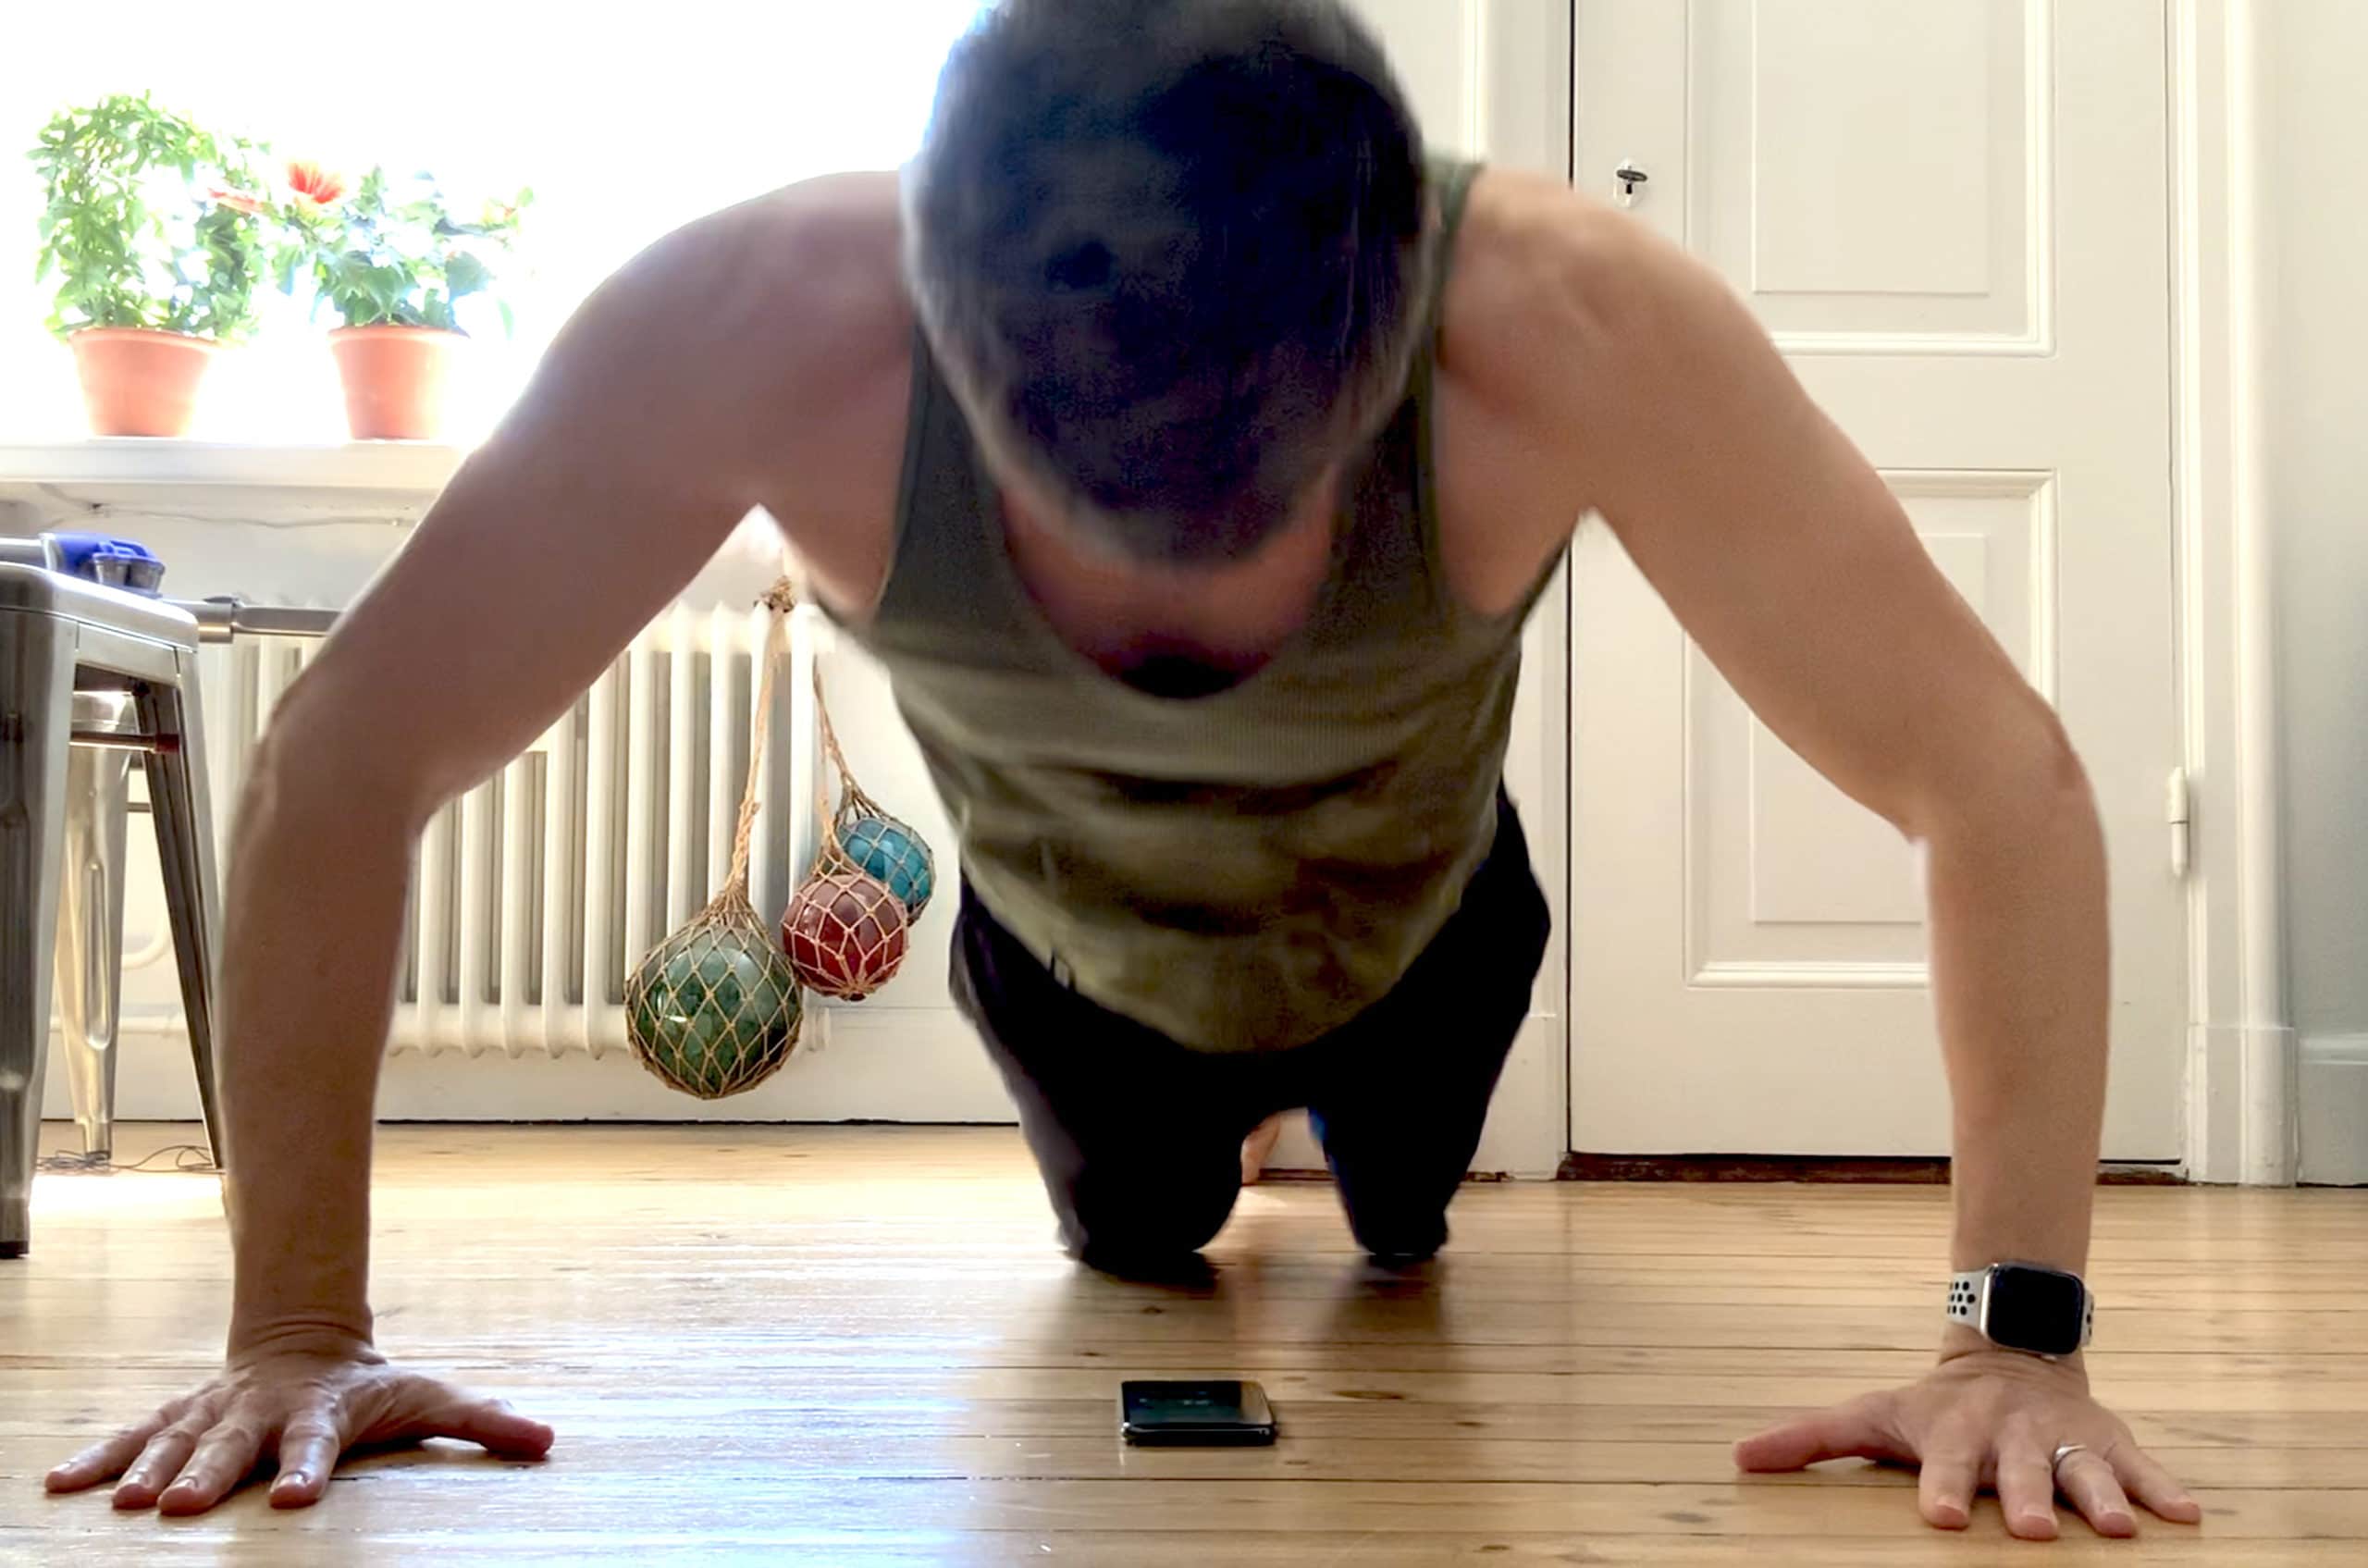 Place your iPhone under your chest and the clever app 22 Pushups counts your reps automatically.